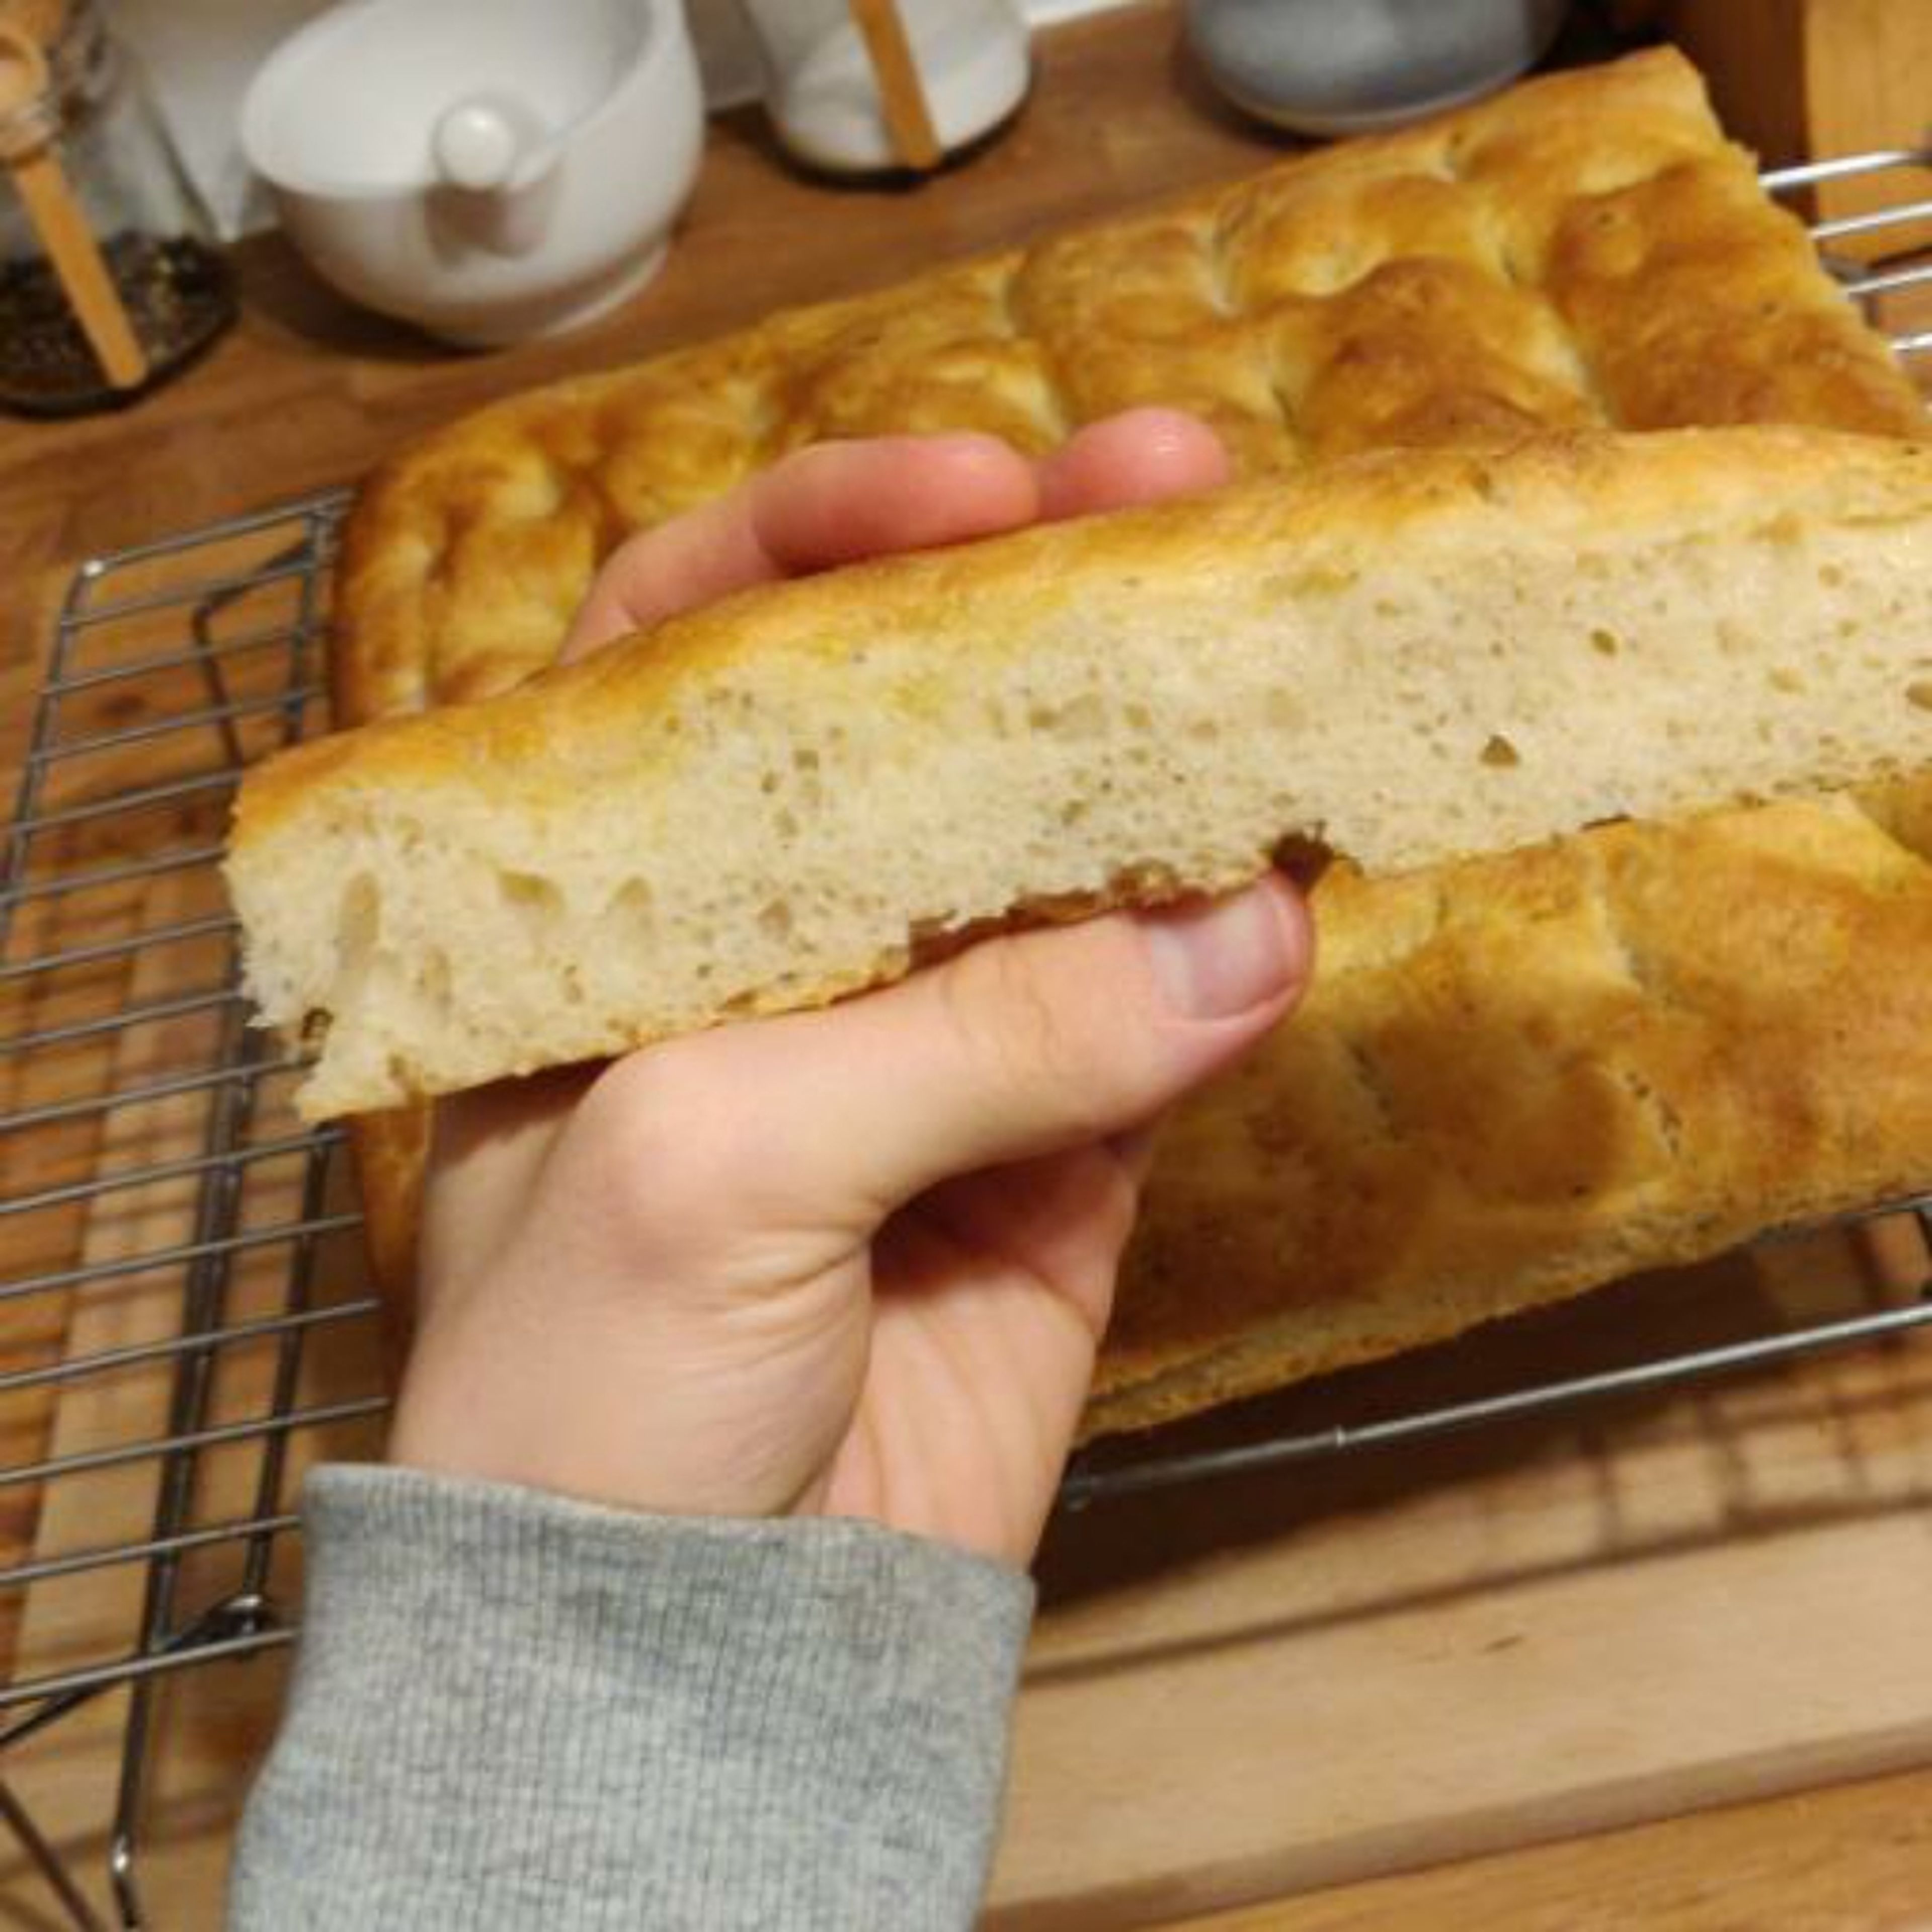 bake at 210c for 23 minutes, or until the top is between golden and golden brown. leave to cool on a wire rack for one hour before cutting or this will ruin the consistency of the bread.